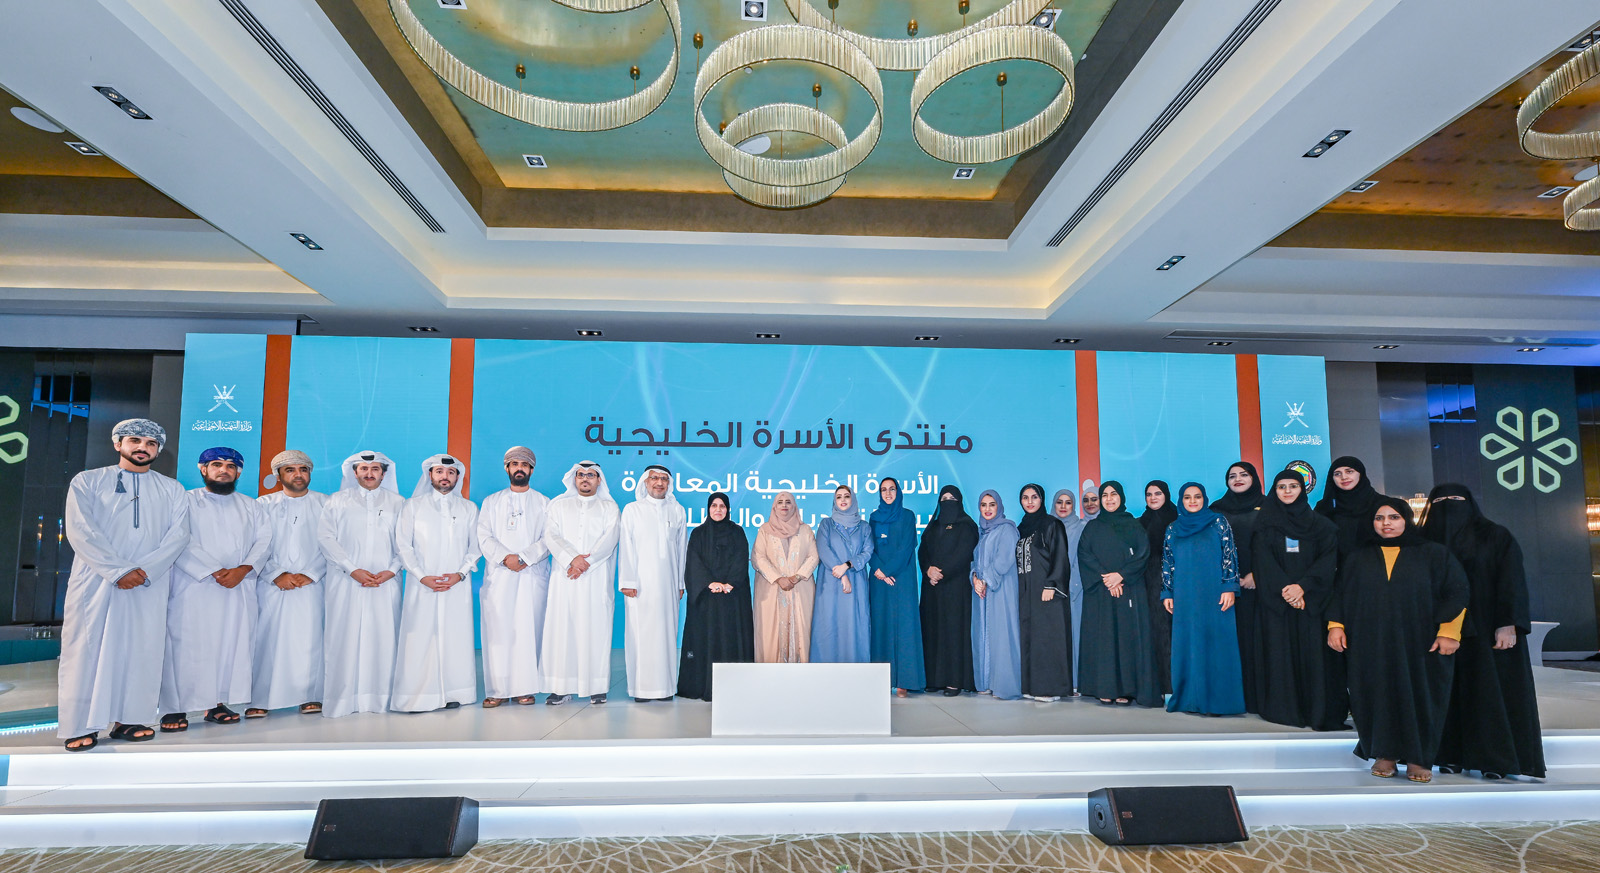 Doha International Family Institute (DIFI), participated in the Gulf Family Forum 2023